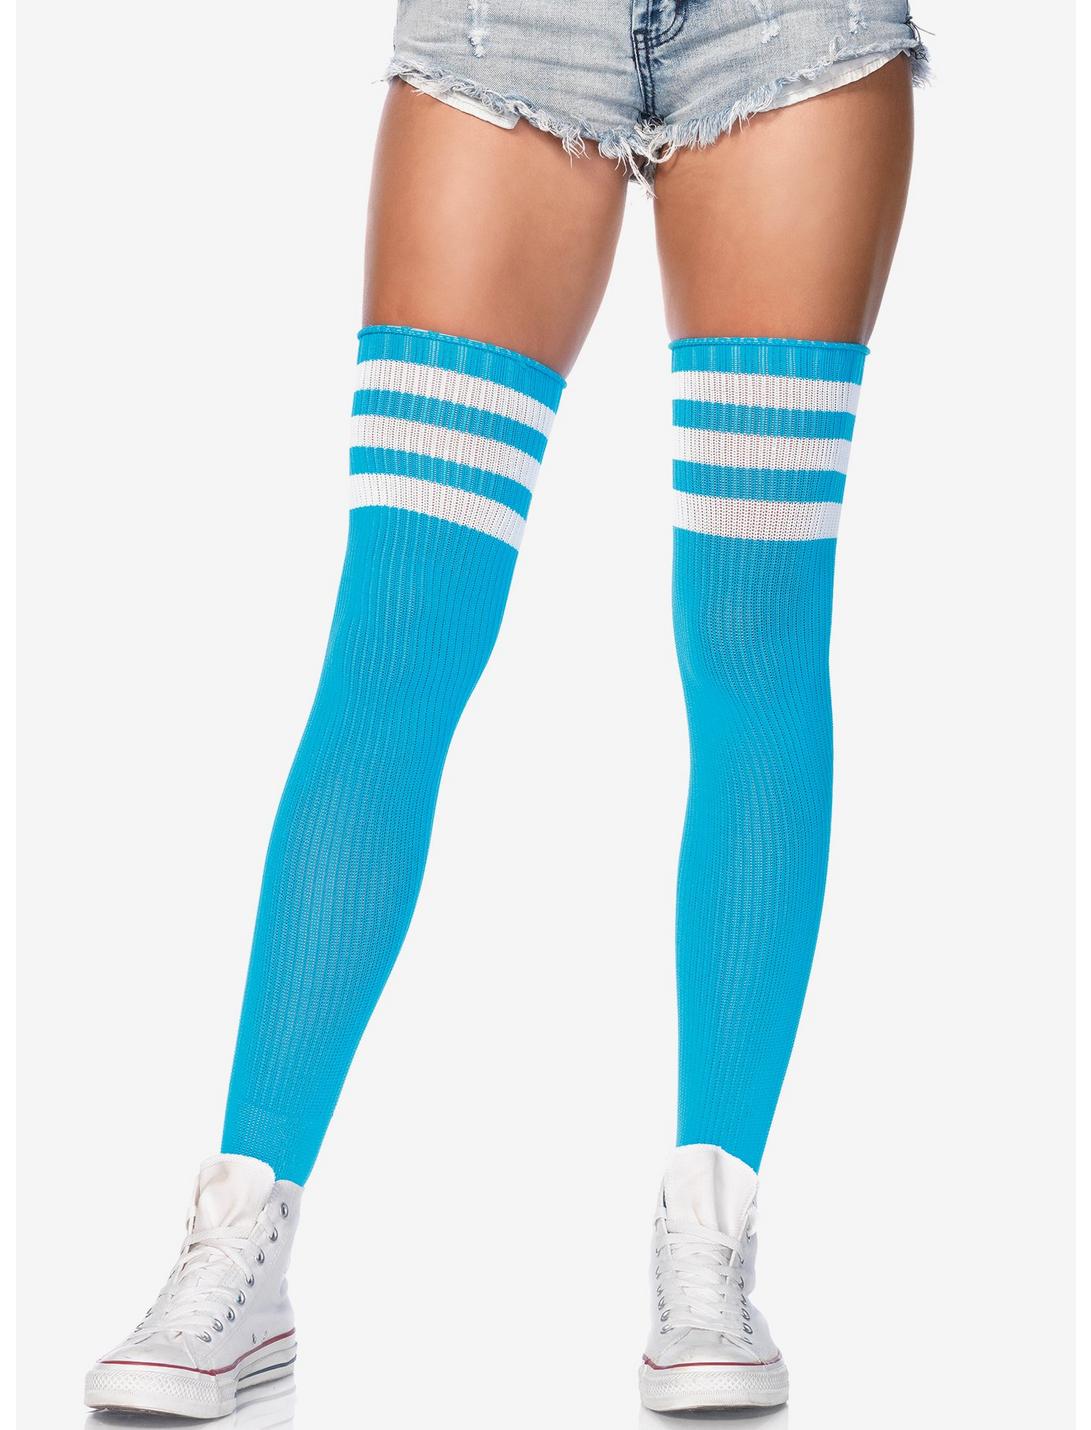 Athletic 3 Stripe Thigh Highs Neon Blue, , hi-res